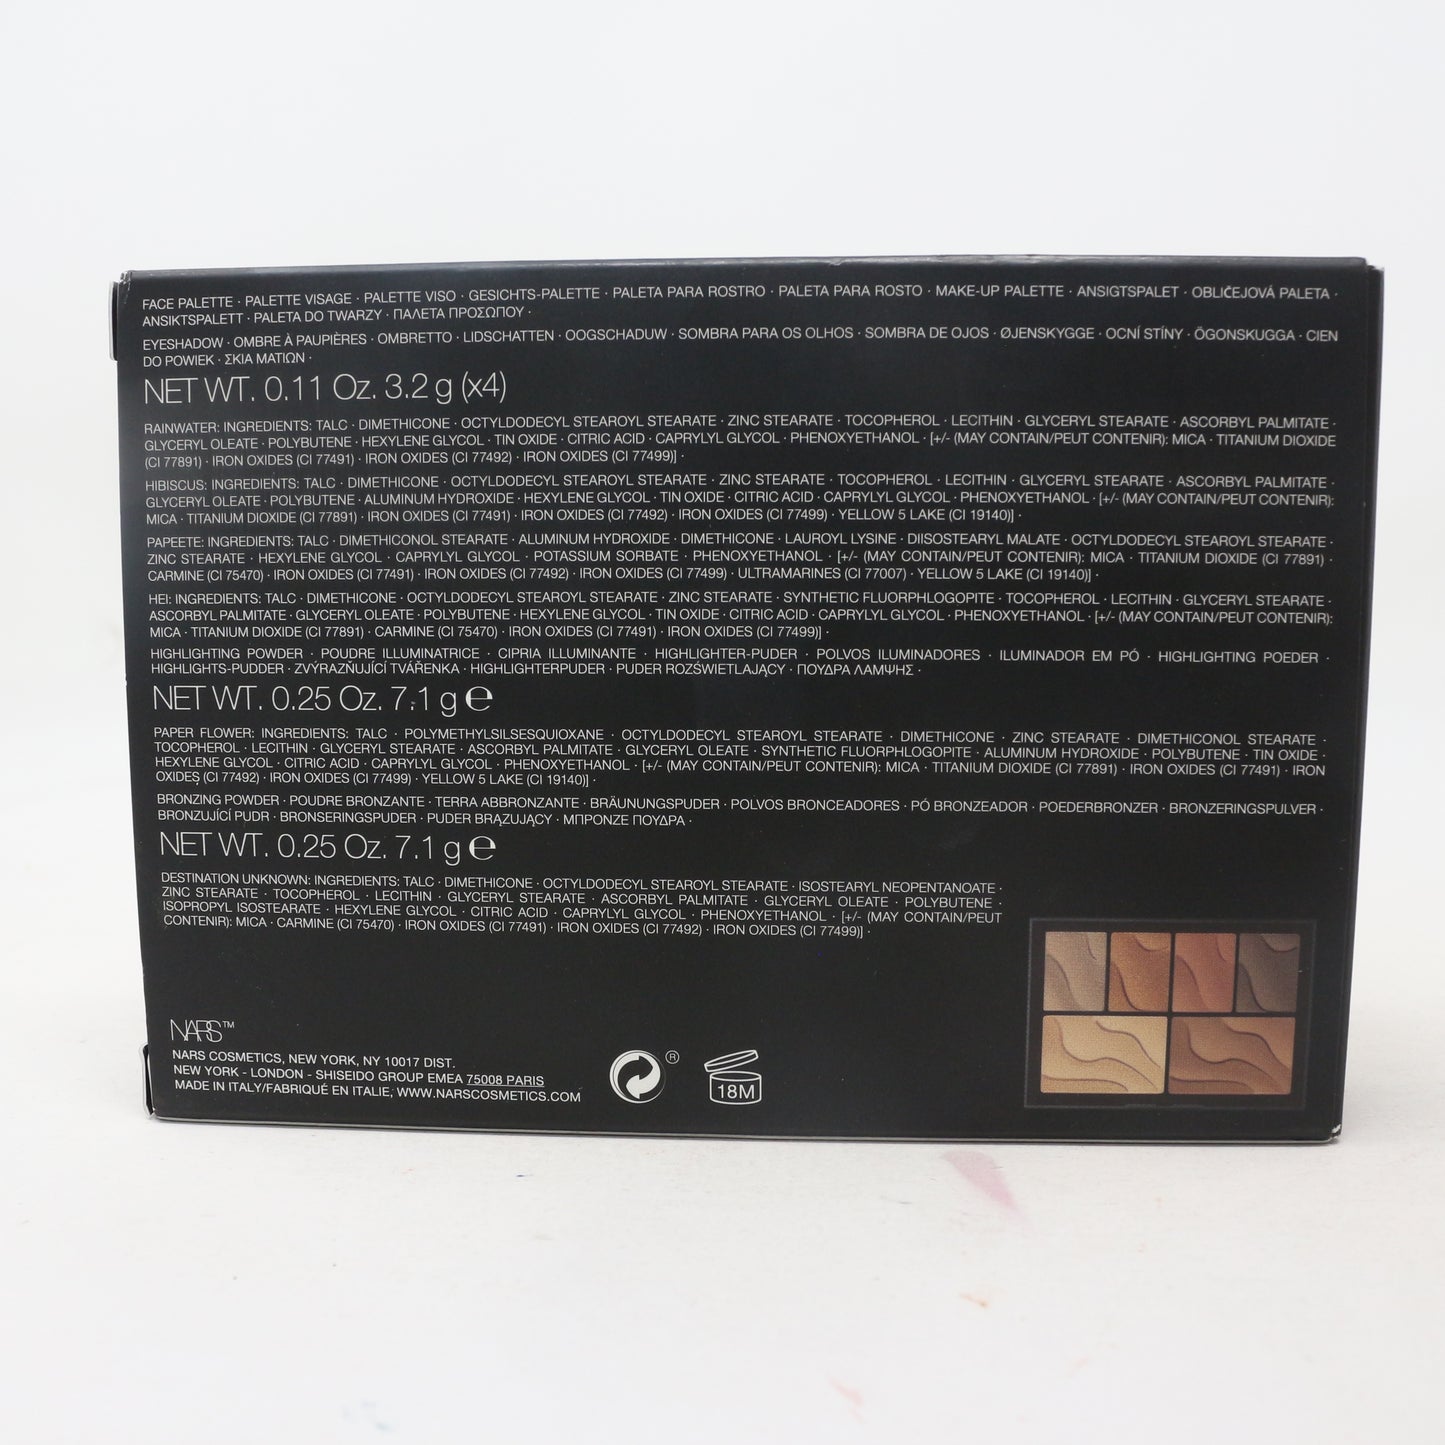 Nars Summer Lights Face Palette  / New With Box